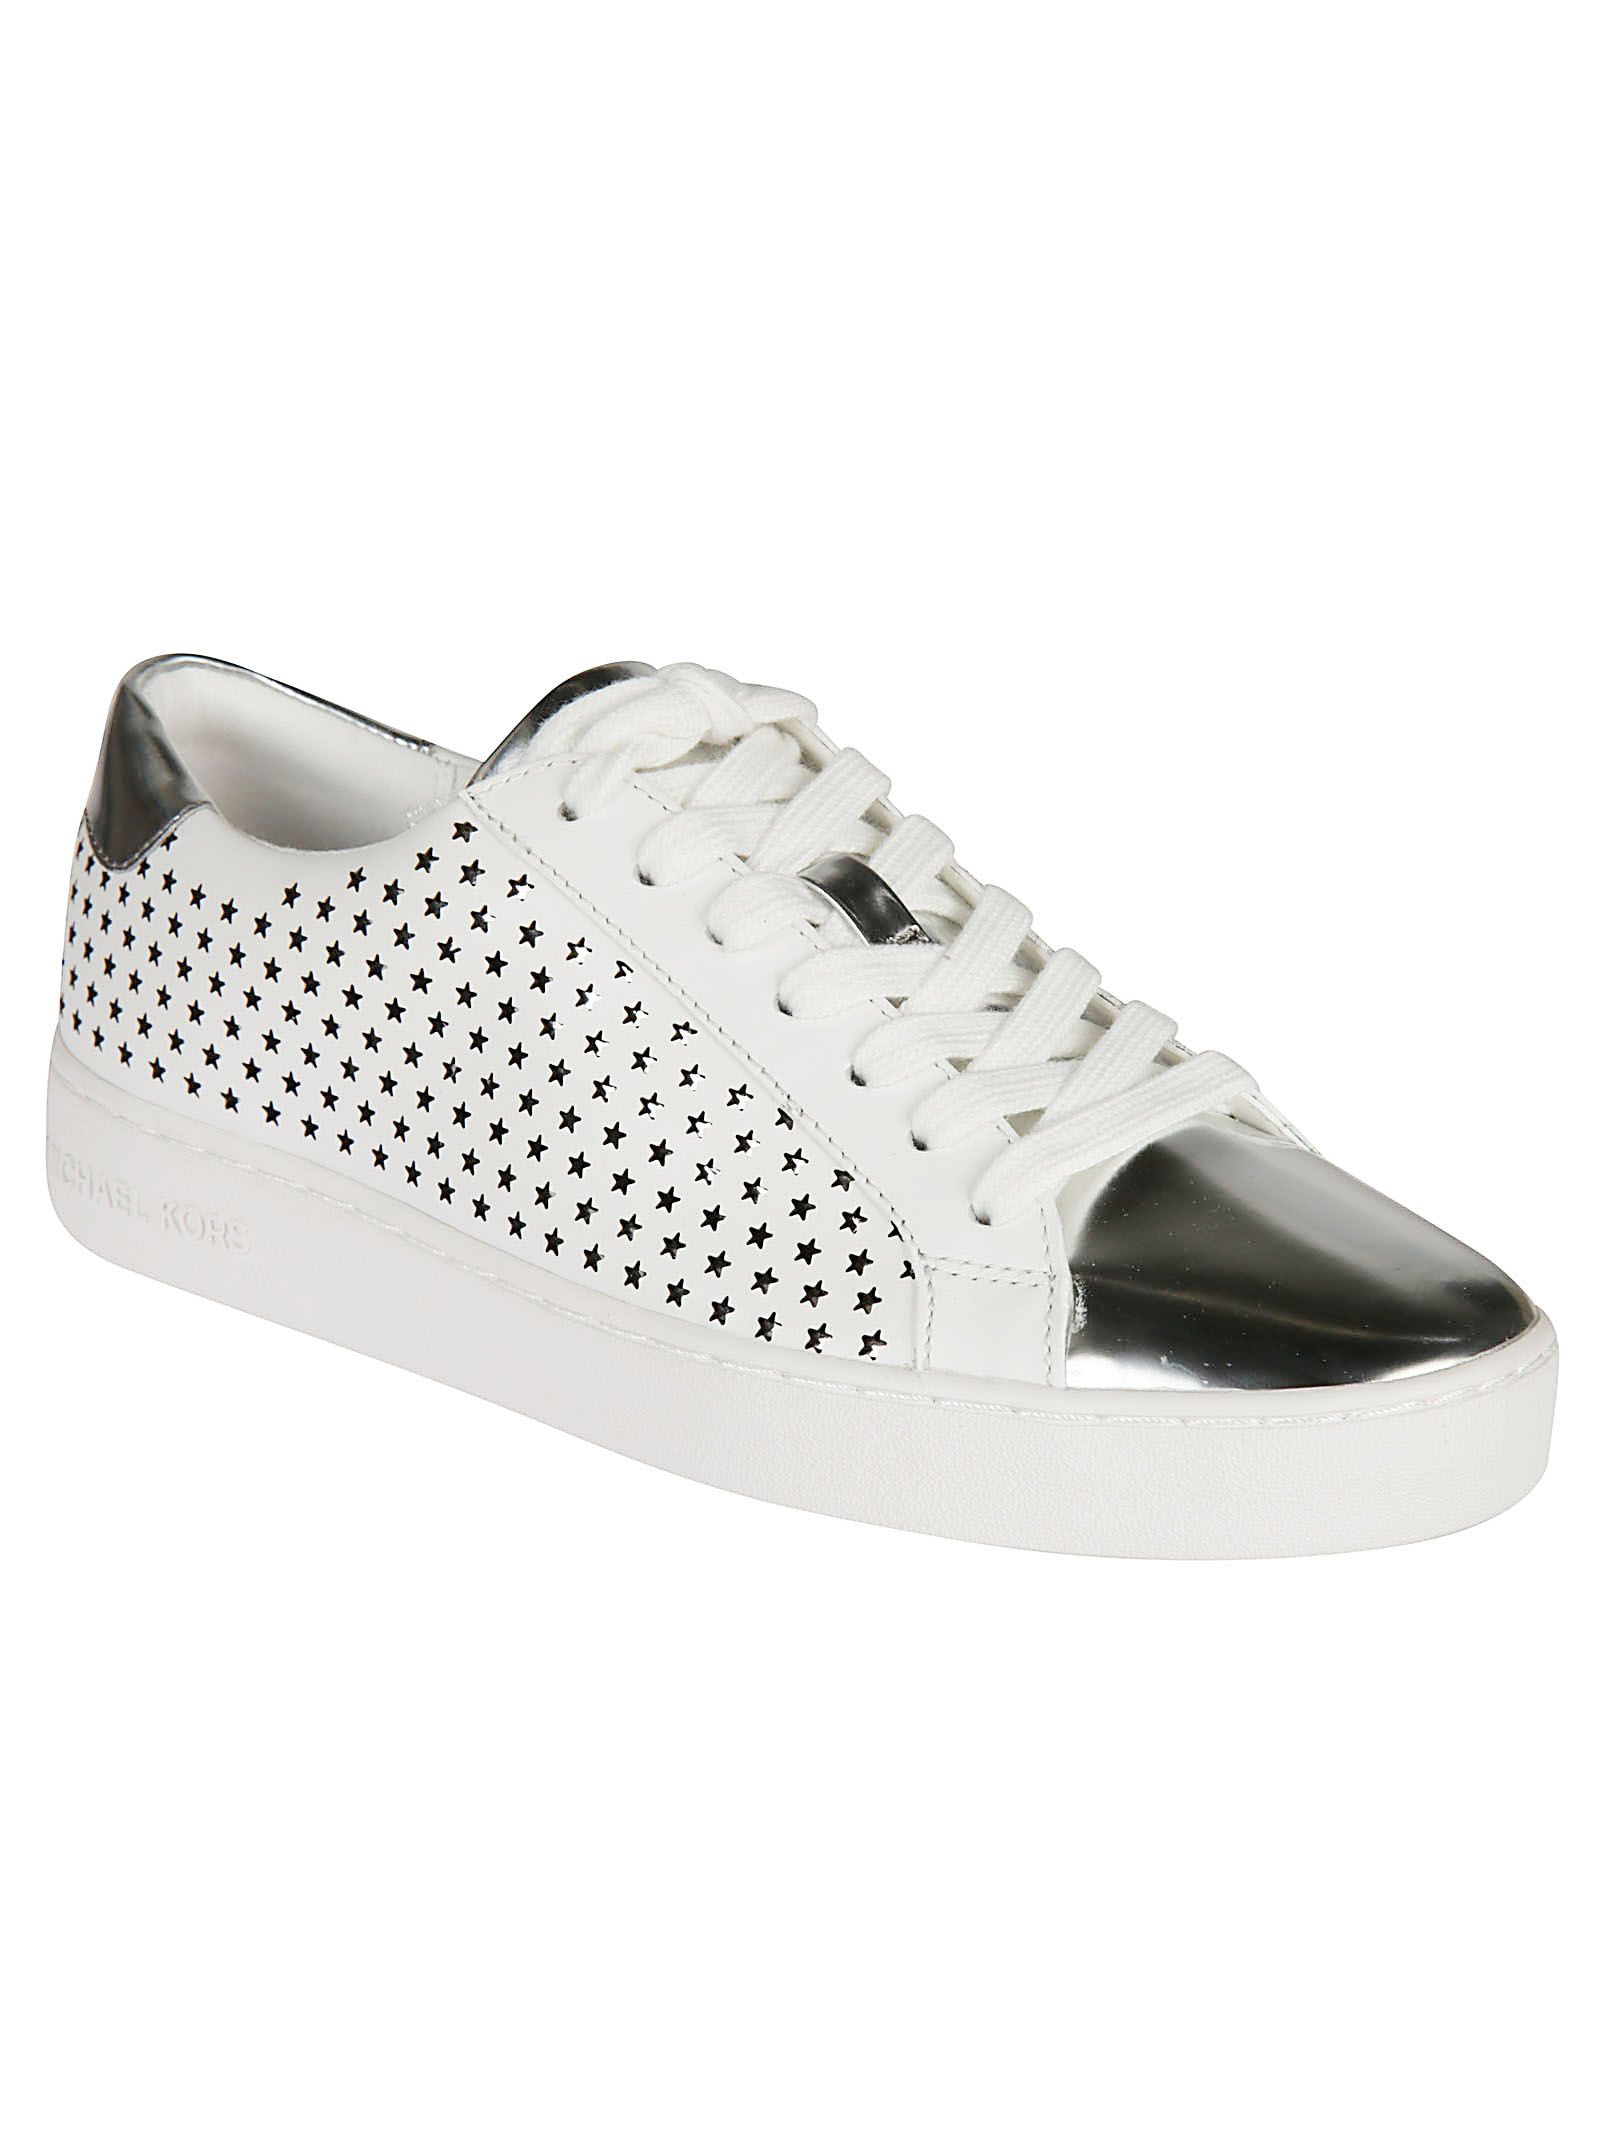 Michael Kors Michael Kors Irving Lace-up Sneakers - white - 10513230 ...